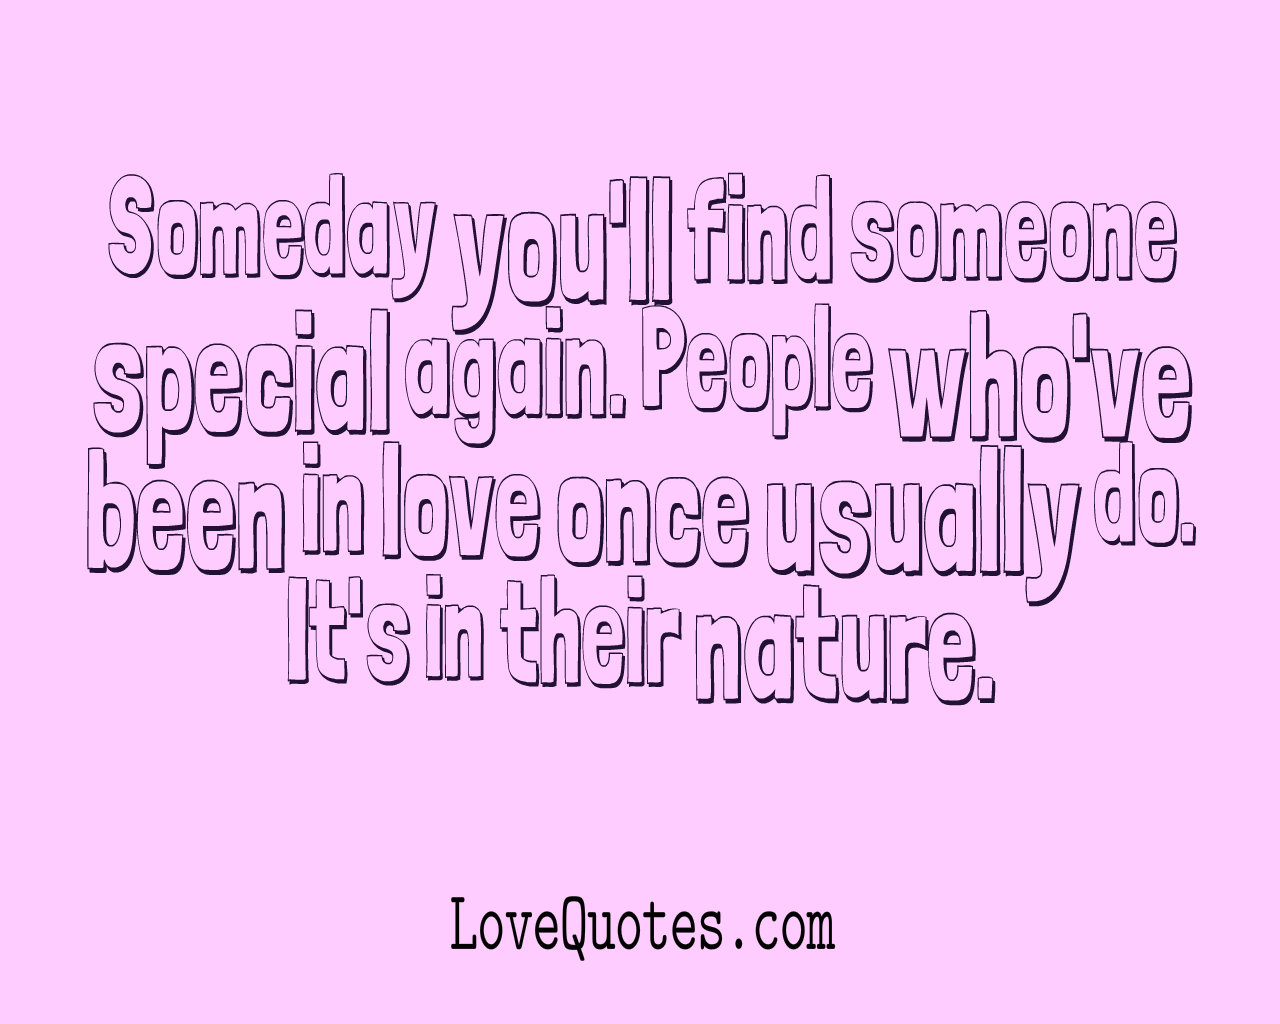 Find Someone Special